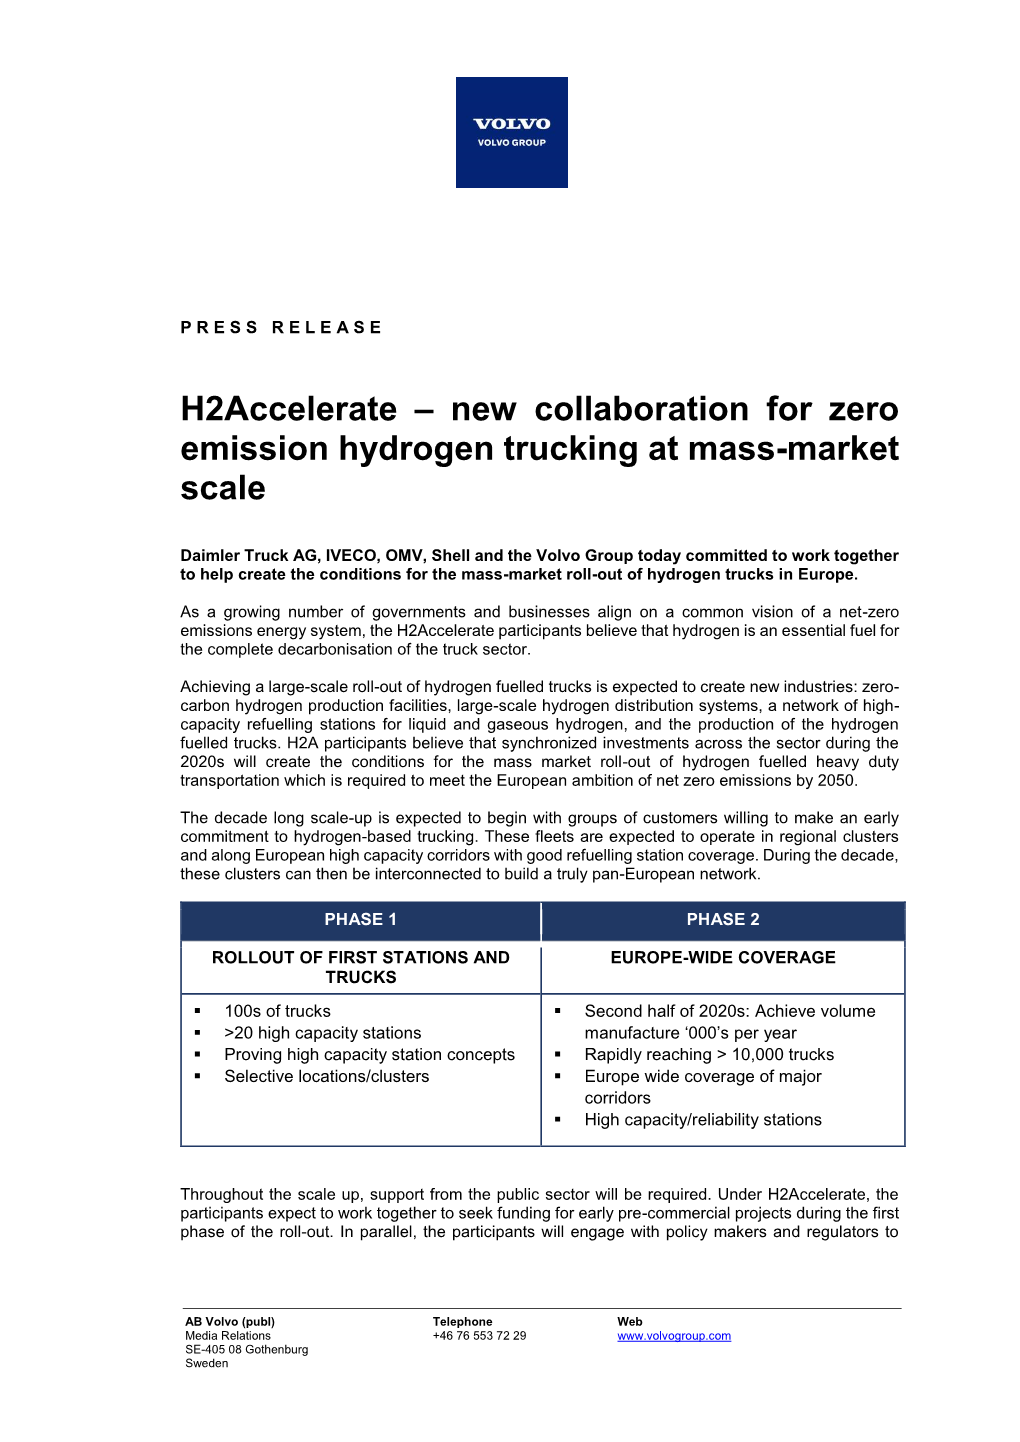 H2accelerate – New Collaboration for Zero Emission Hydrogen Trucking at Mass-Market Scale